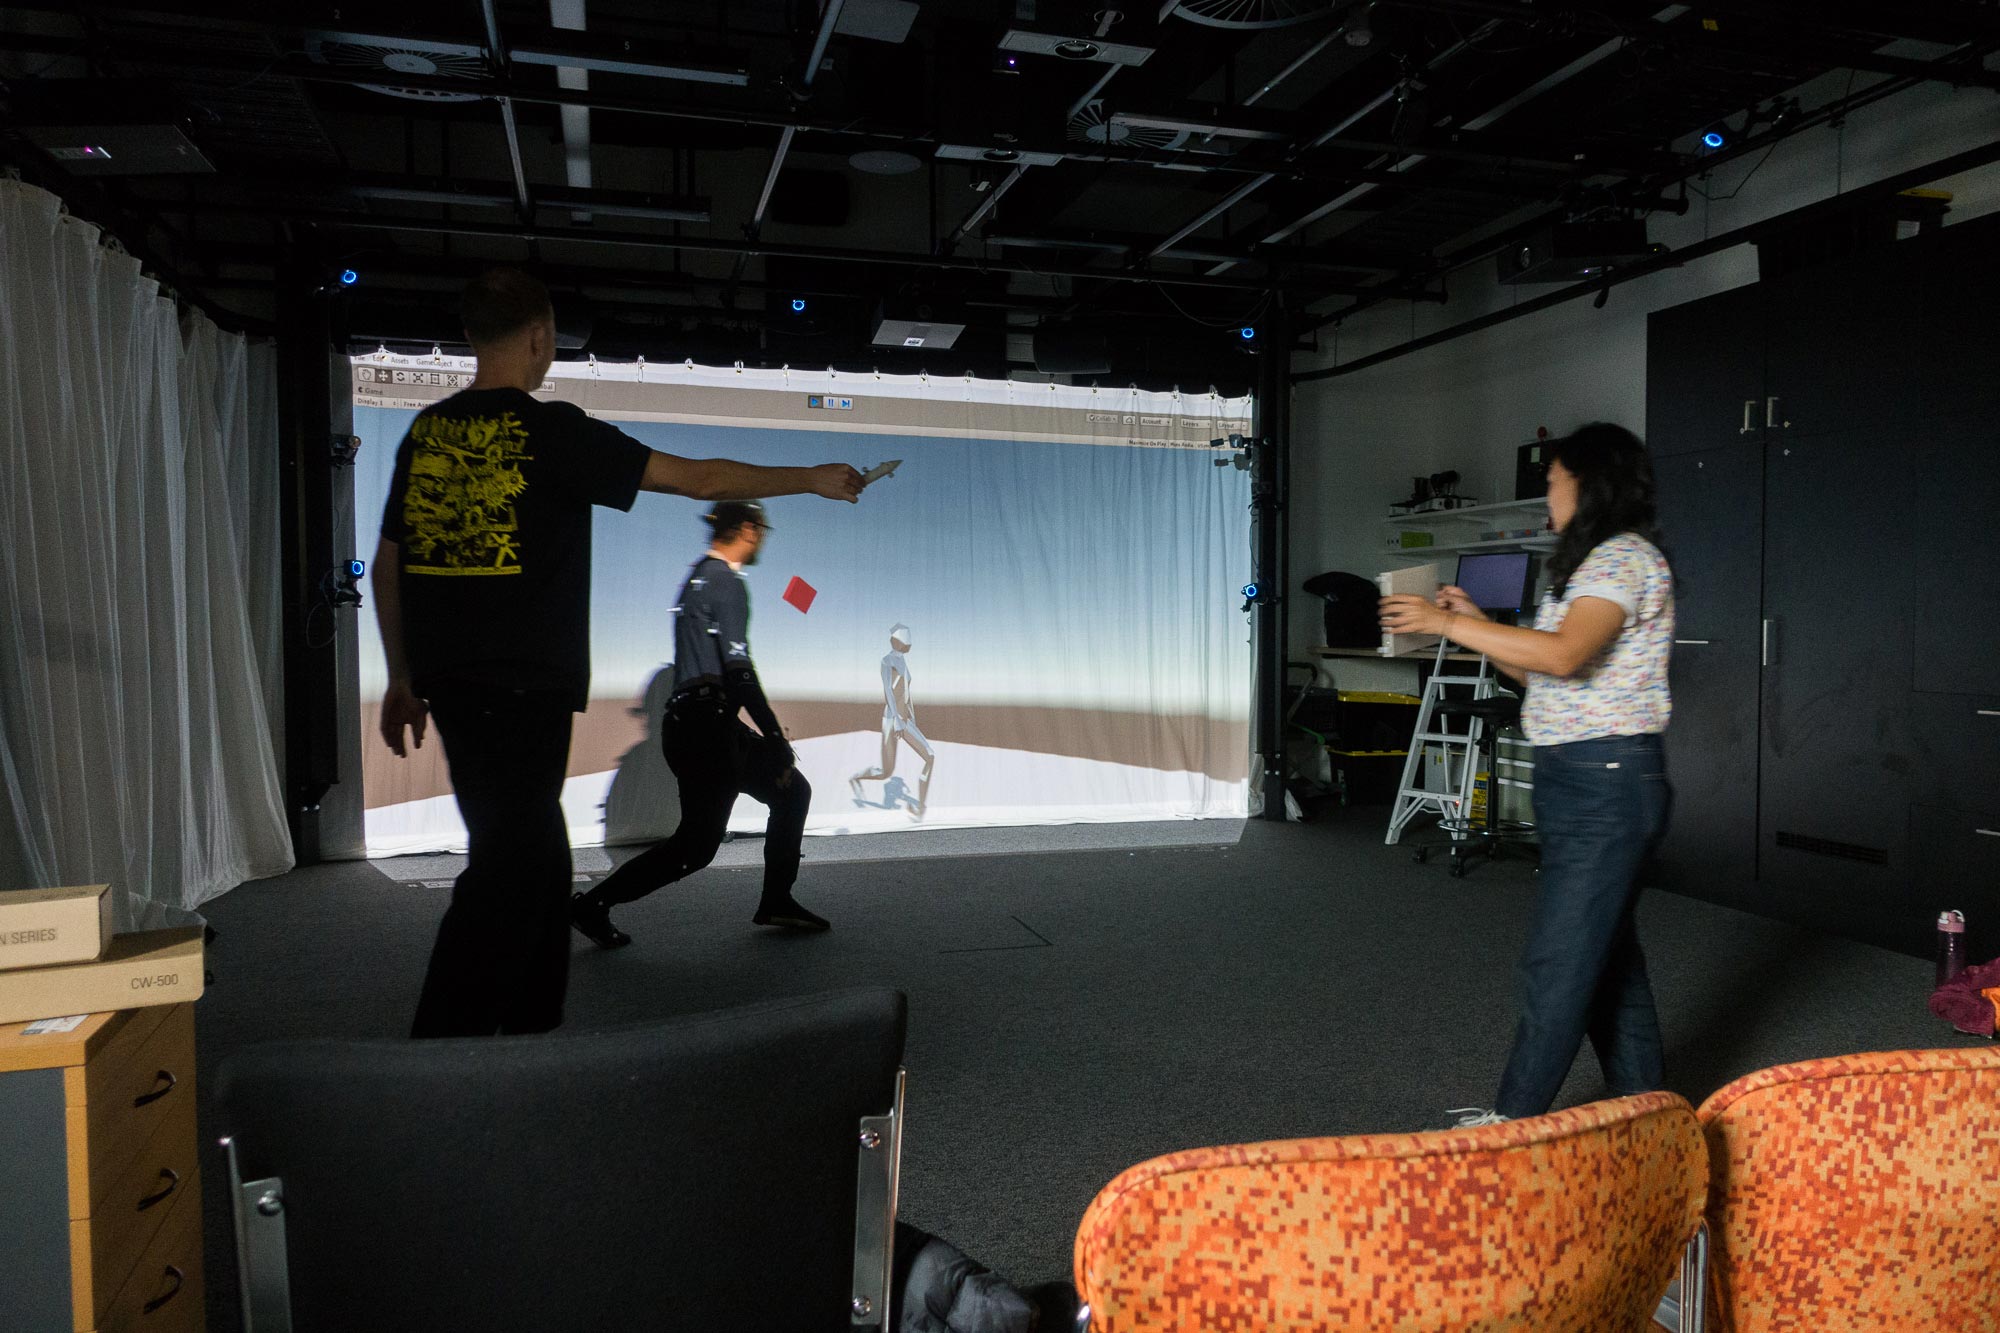 Photograph of realtime motion capture performance